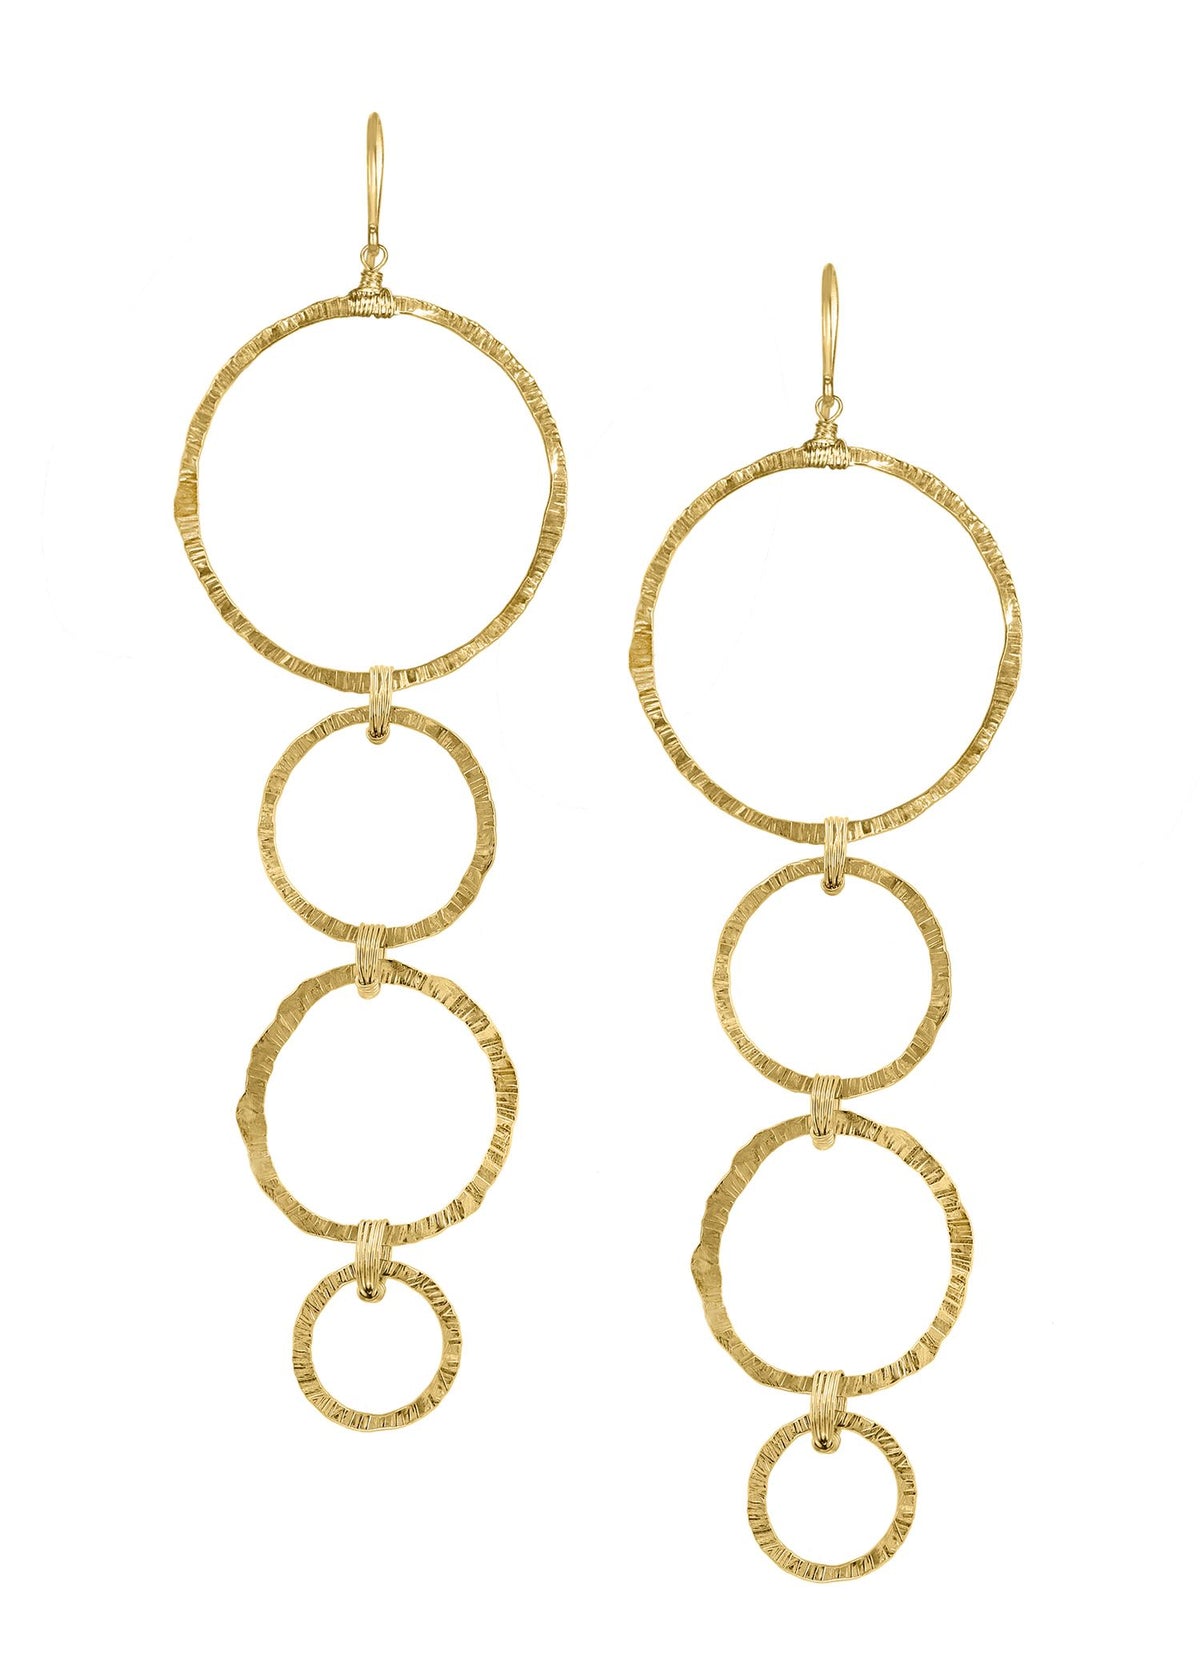 14k gold fill Earrings measure 3-1/2&quot; in length (including the ear wires) and 1-1/16&quot; in width Handmade in our Los Angeles studio